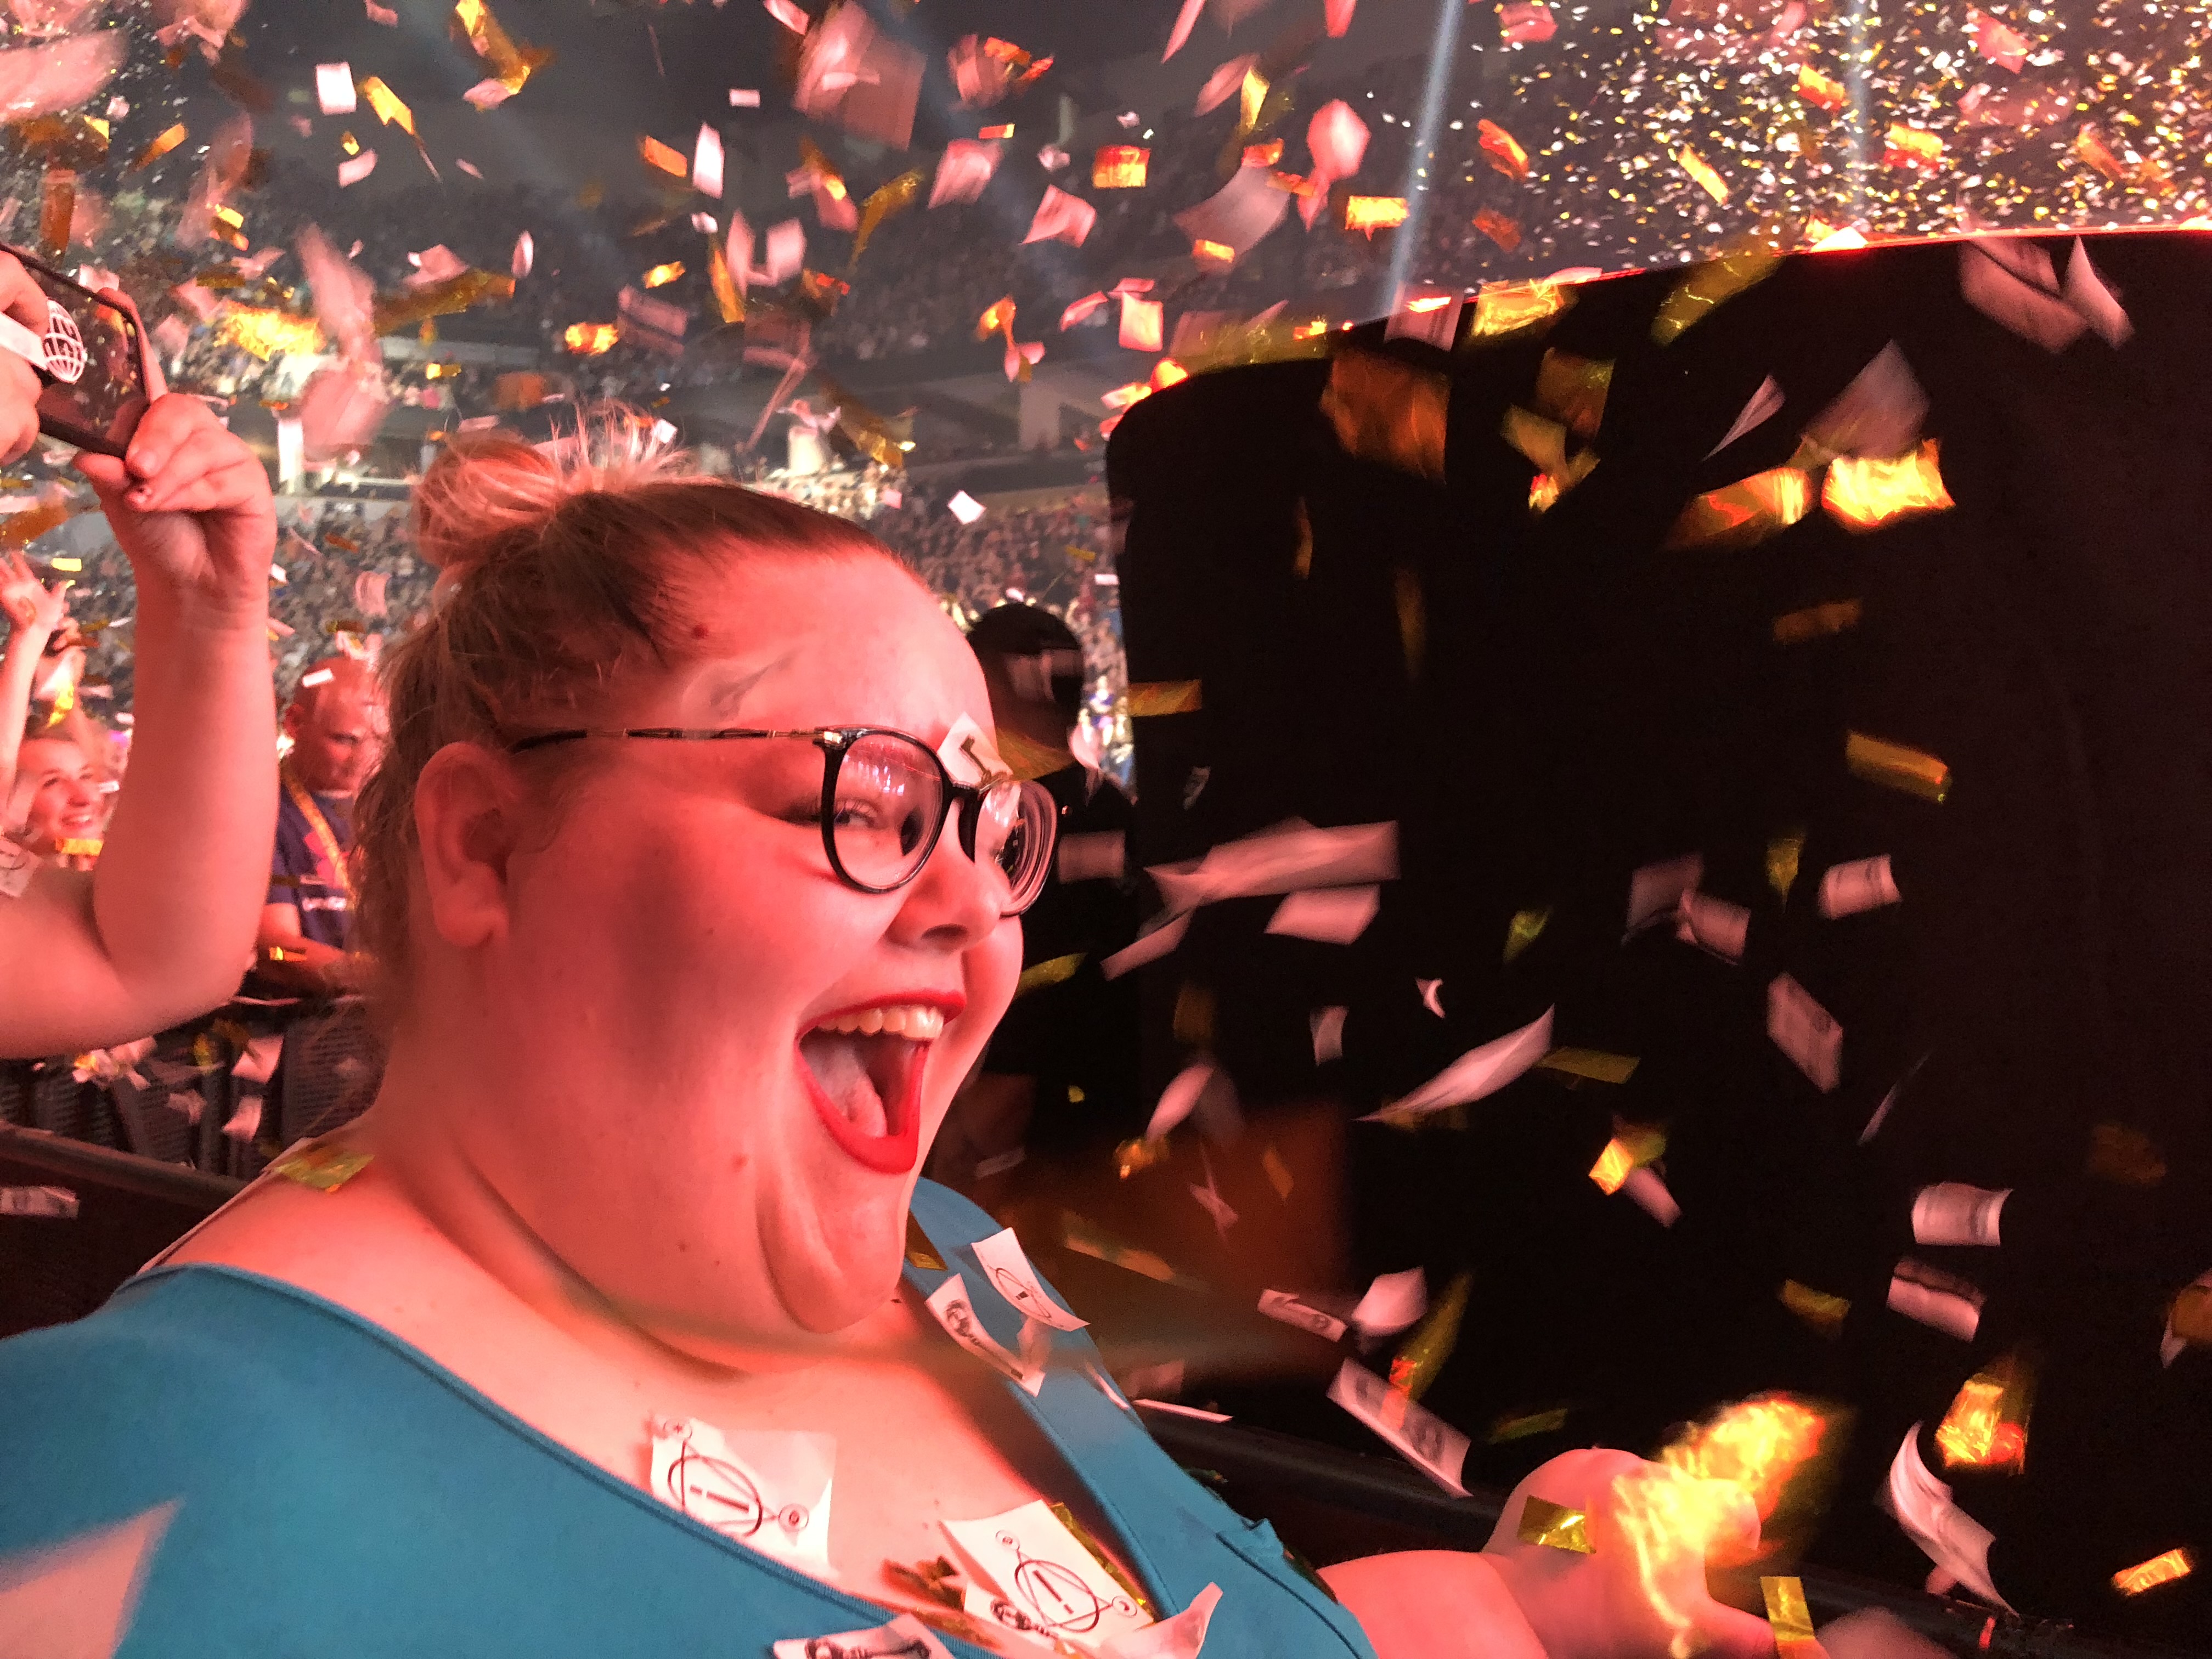 ash screaming while being rained on by panic! at the disco confetti